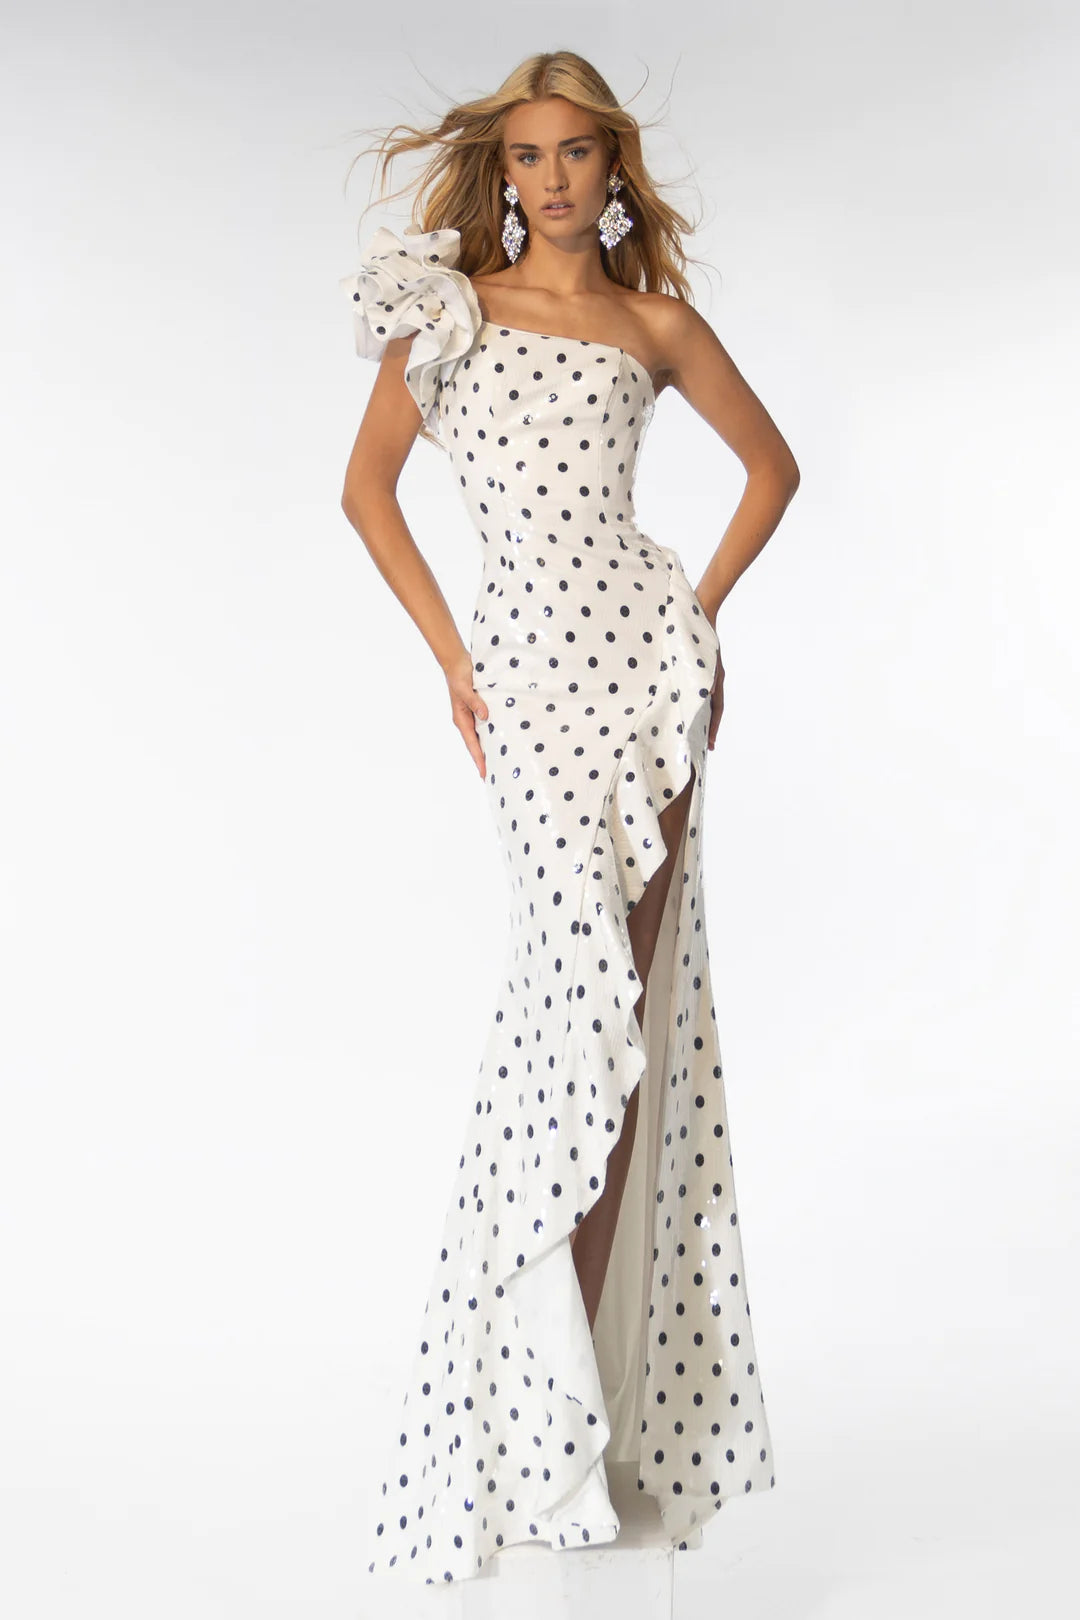 Step onto the red carpet in style with the Ava Presley 39264 Sequin Polka Dot Fitted One Shoulder Long Dress. This stunning gown features a unique one shoulder design and a fitted silhouette adorned with shimmering sequin polka dots. Perfect for prom, formal events, or pageants, this dress guarantees a show-stopping entrance.